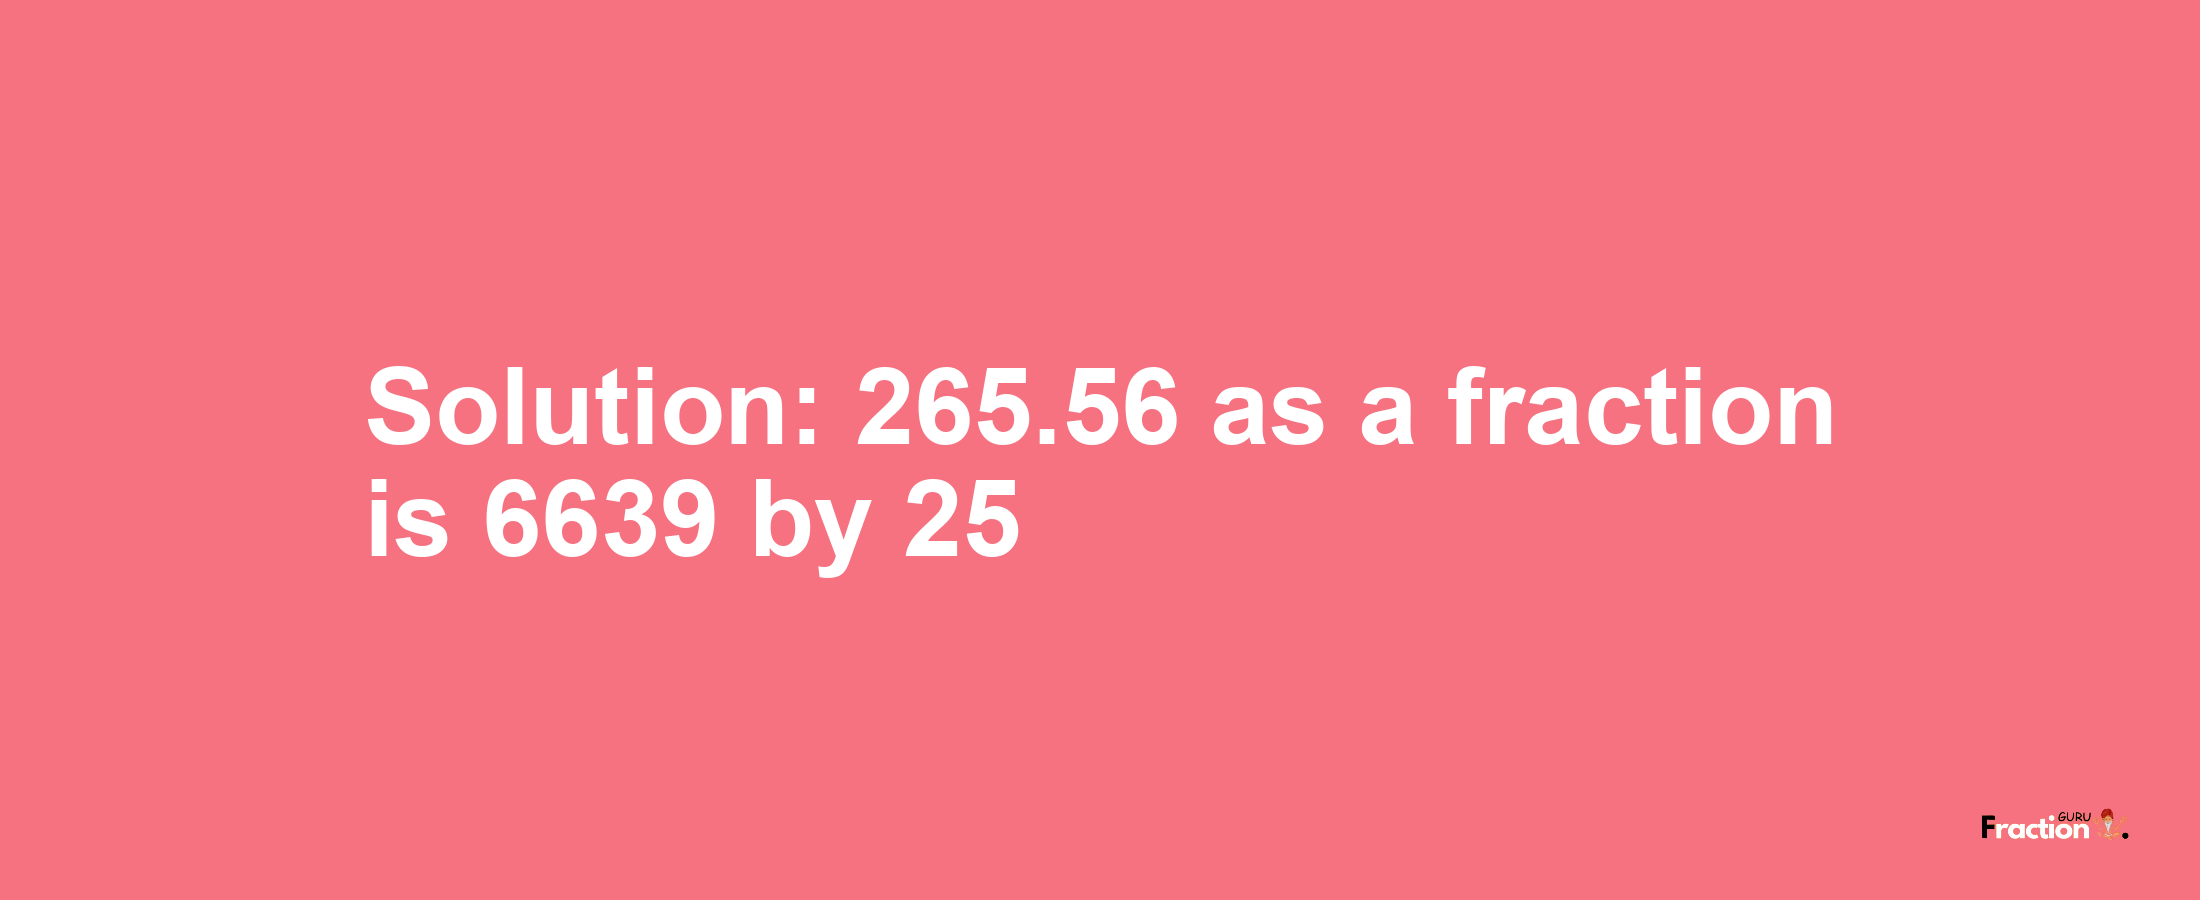 Solution:265.56 as a fraction is 6639/25